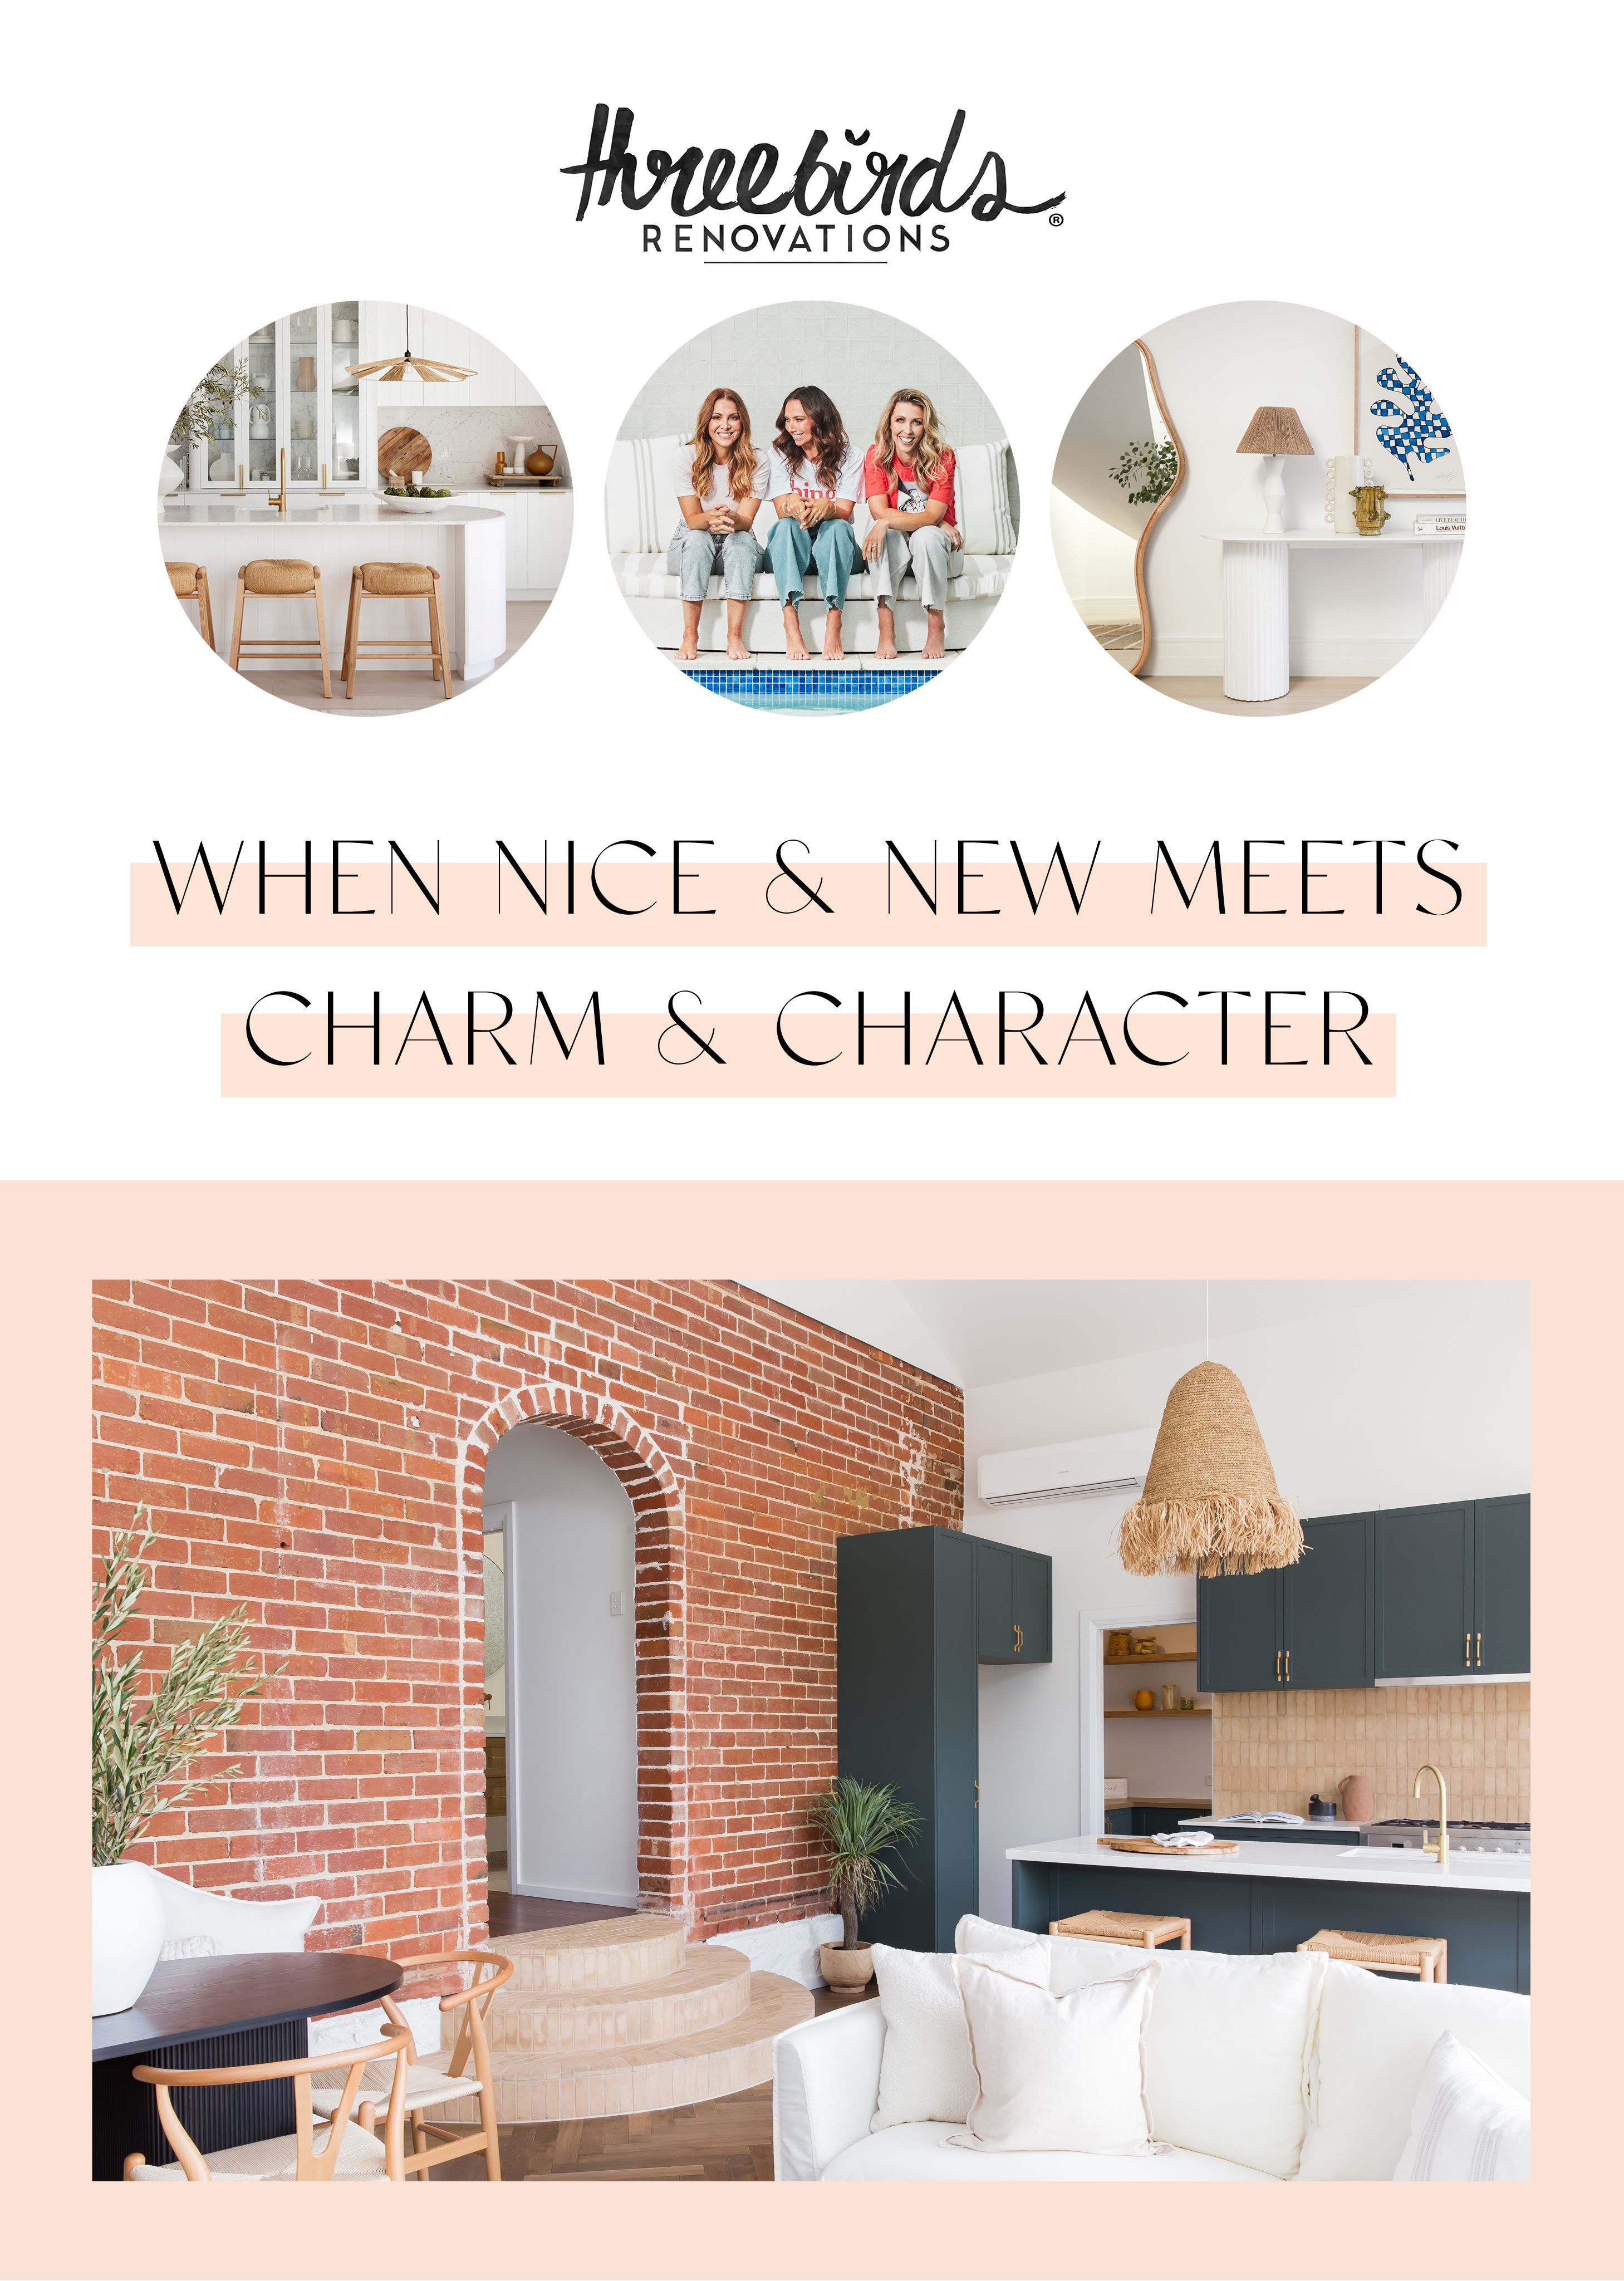  Yooty RENOVATIONS ' WHEN NICE NEW MEETS CHARM CHARACTER N A N . A i i 